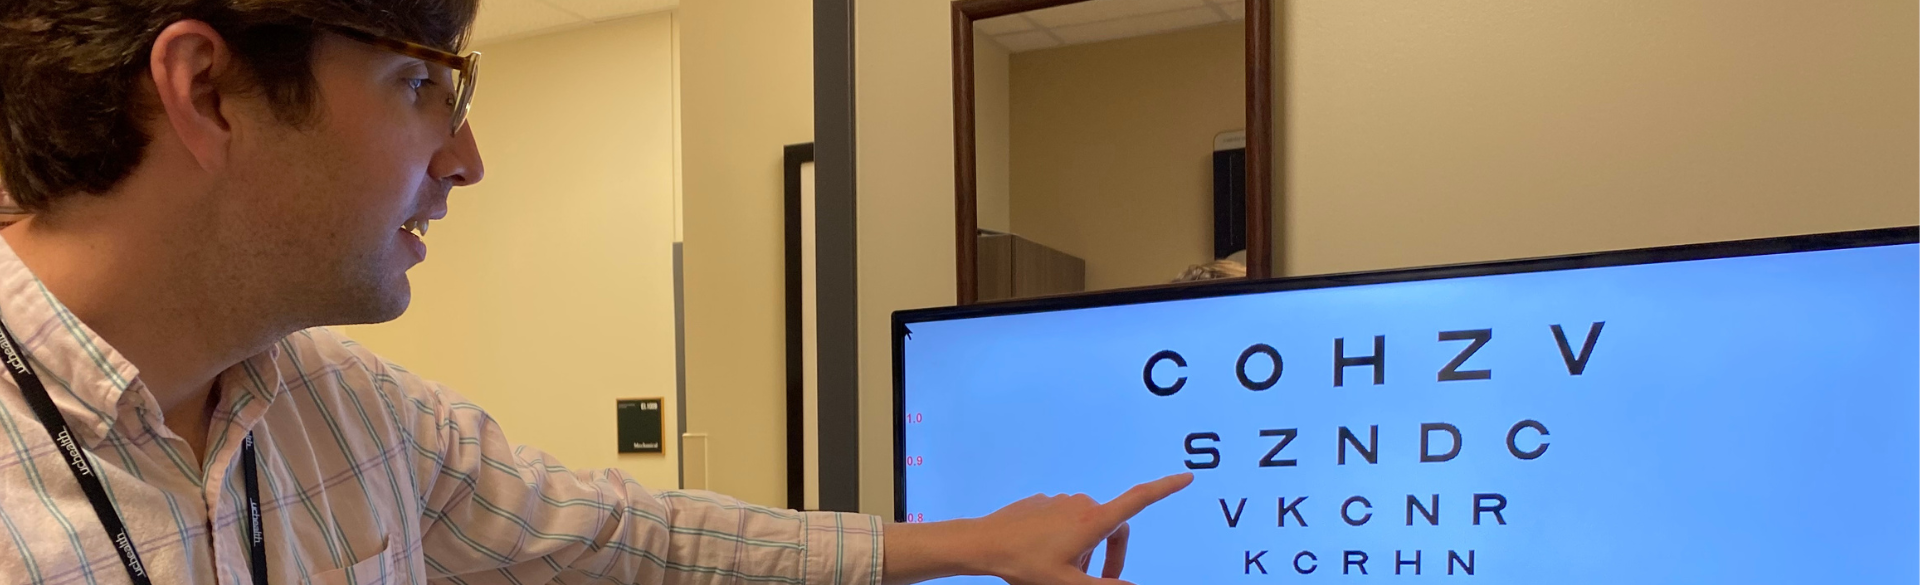 Tech tips and tricks can help people with low-vision impairments.